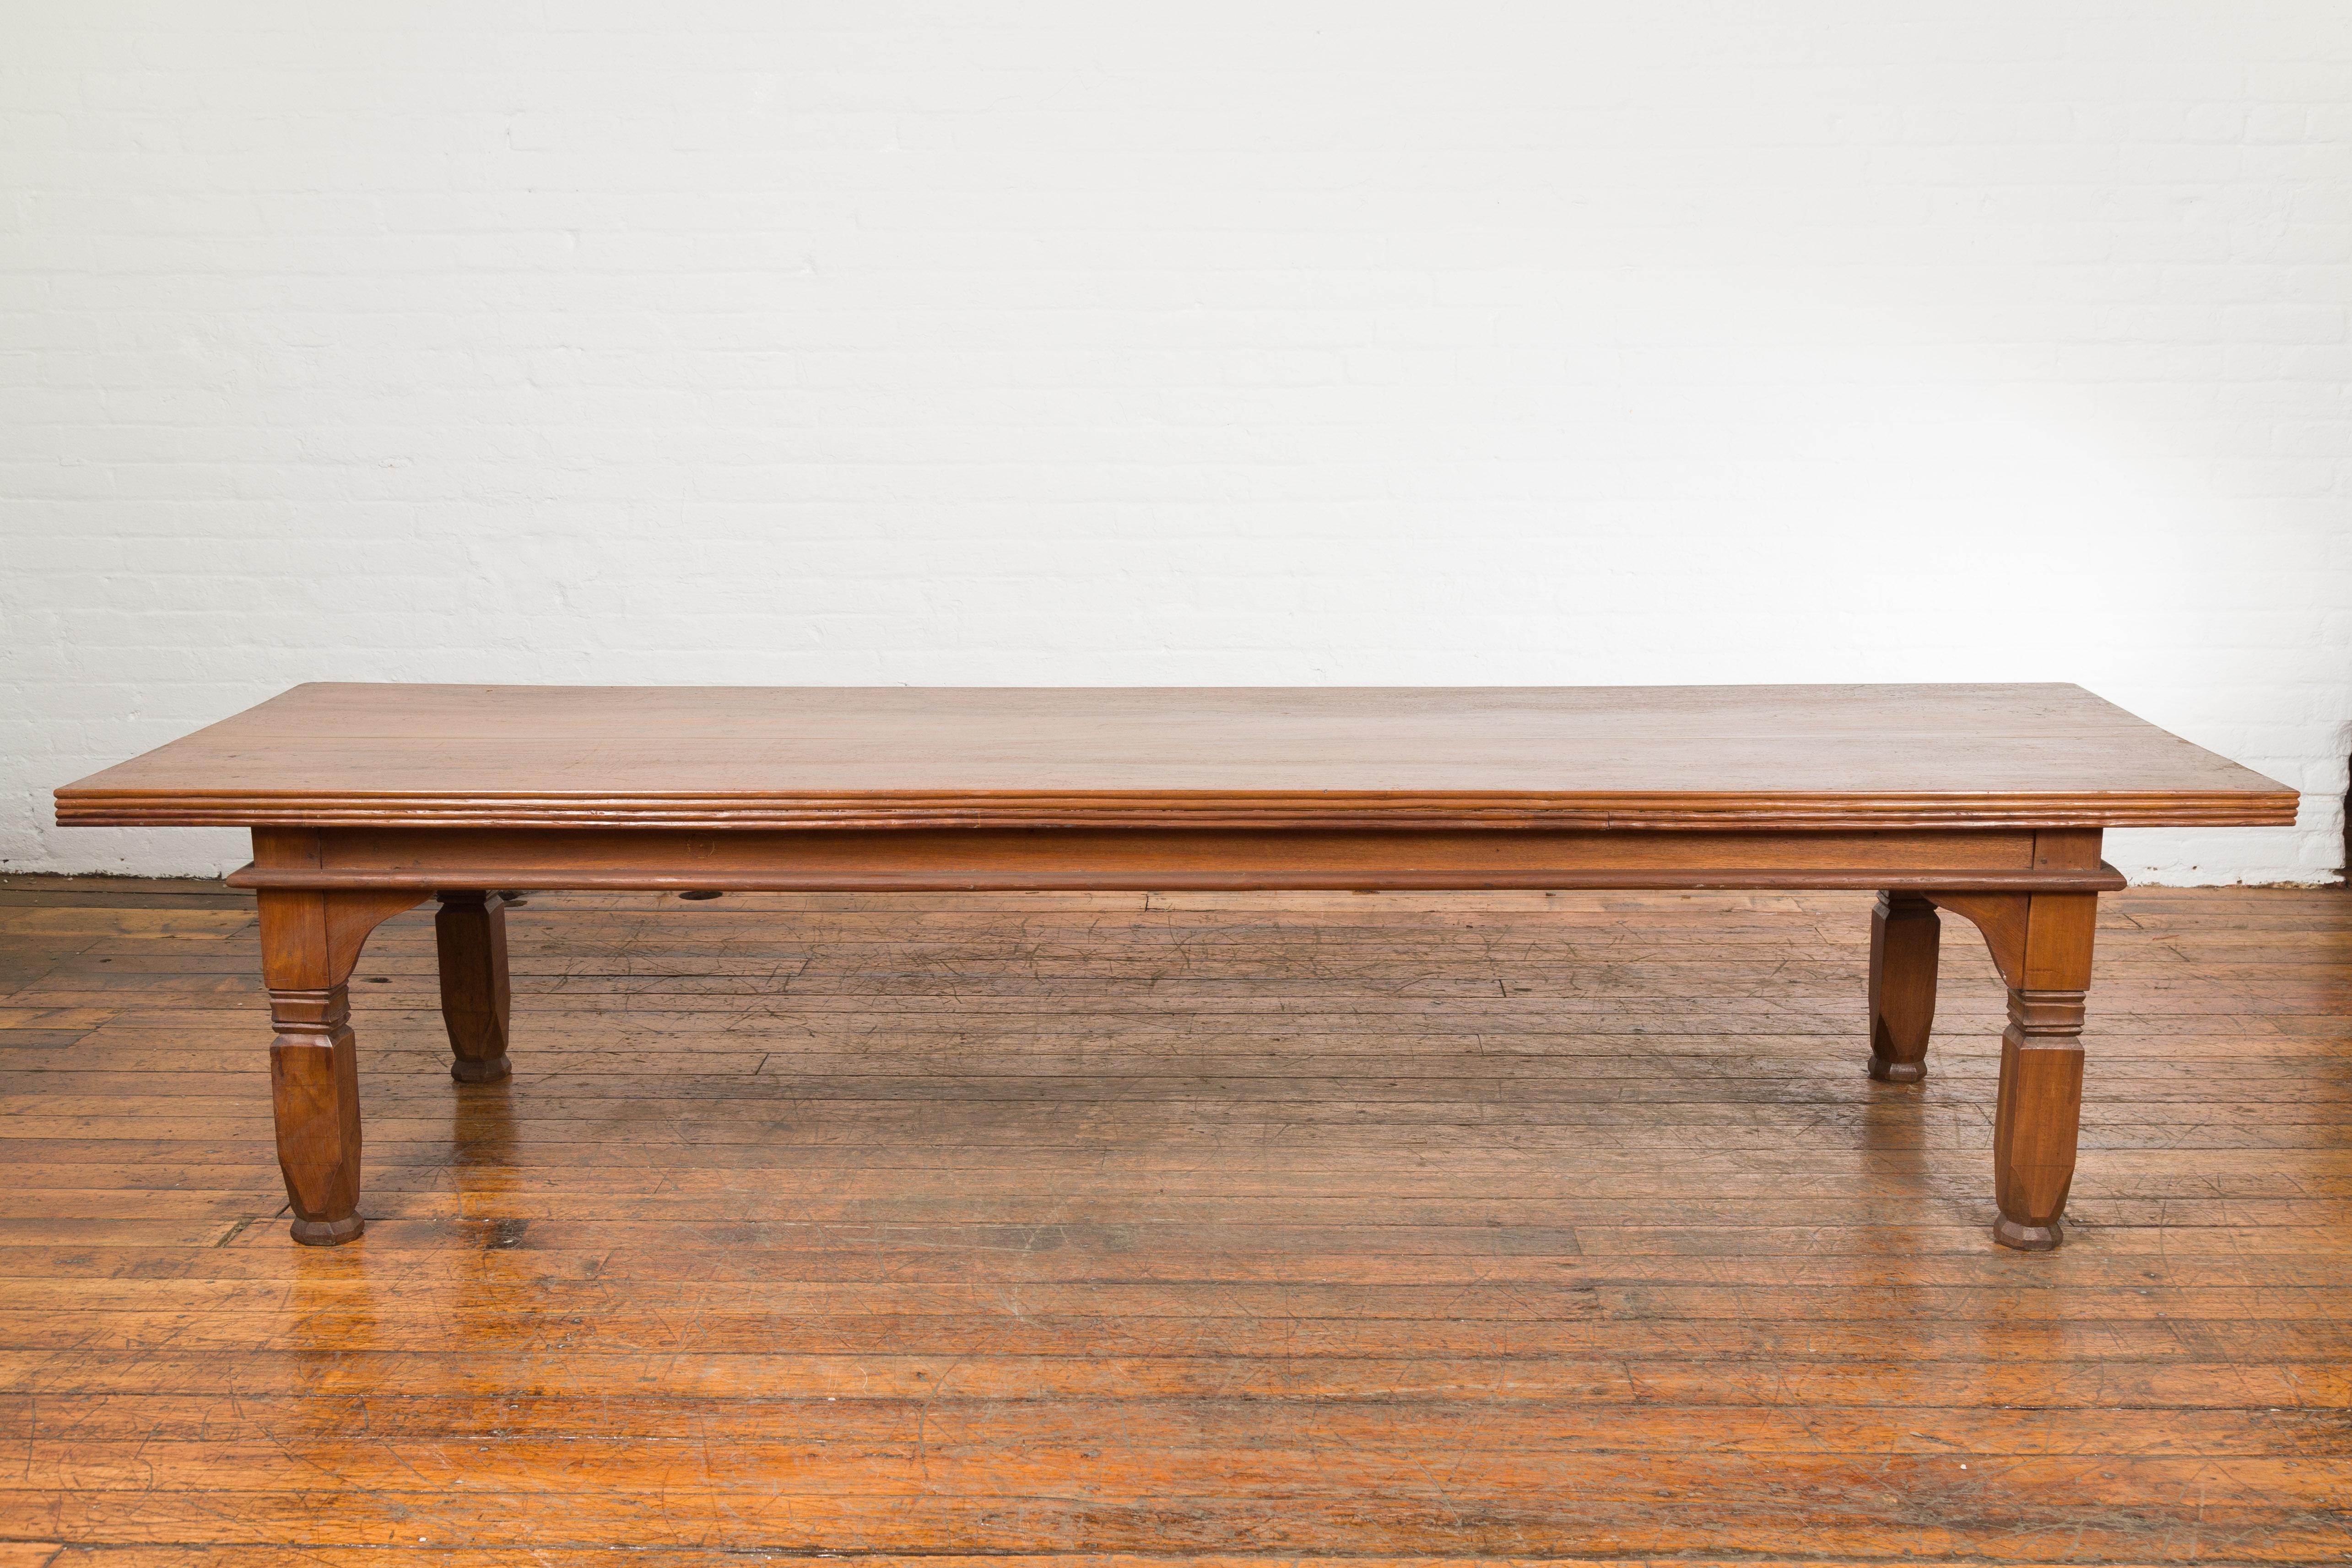 Oversized 19th Century Indonesian Coffee Table with Reeded Edge and Carved Legs For Sale 2